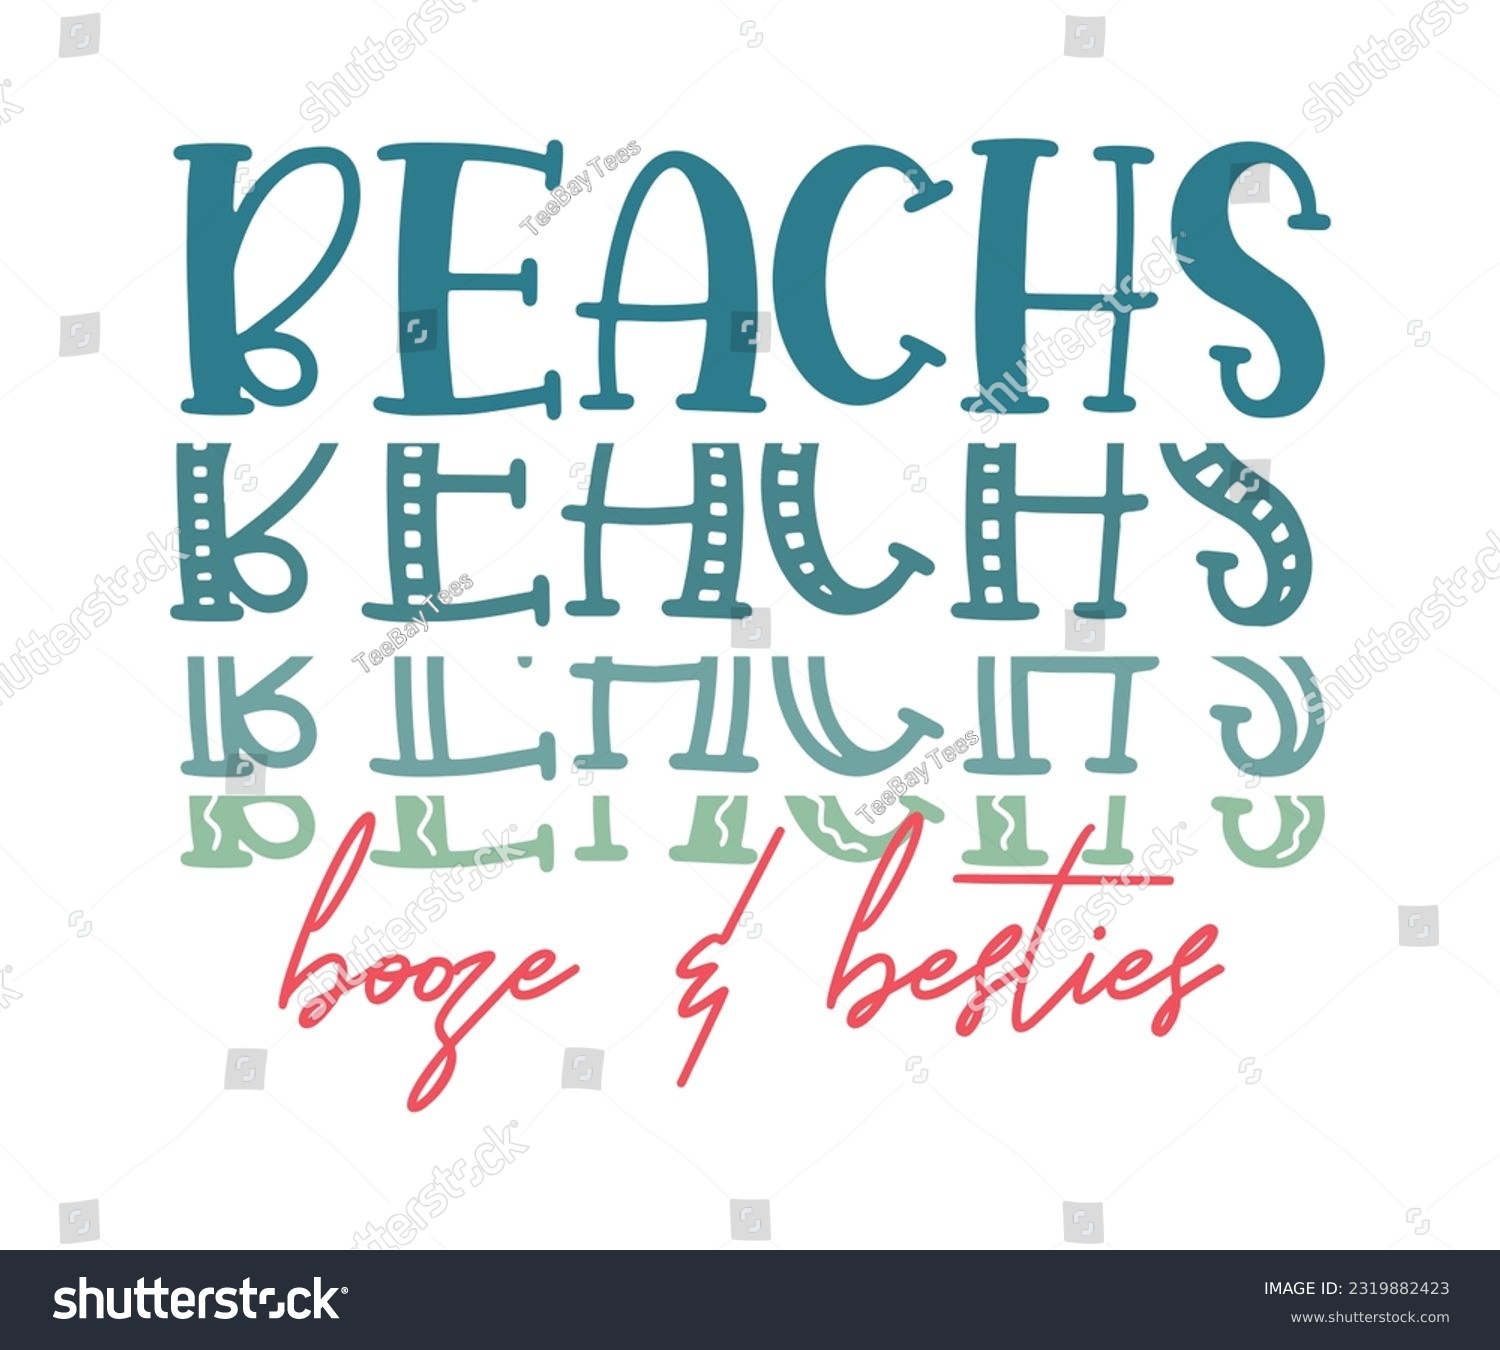 SVG of Beachs boozes and besties, summer phrase. Summer retro vintage vector print for t-shirt, Mug, Sticker, fashion prints, posters and other svg